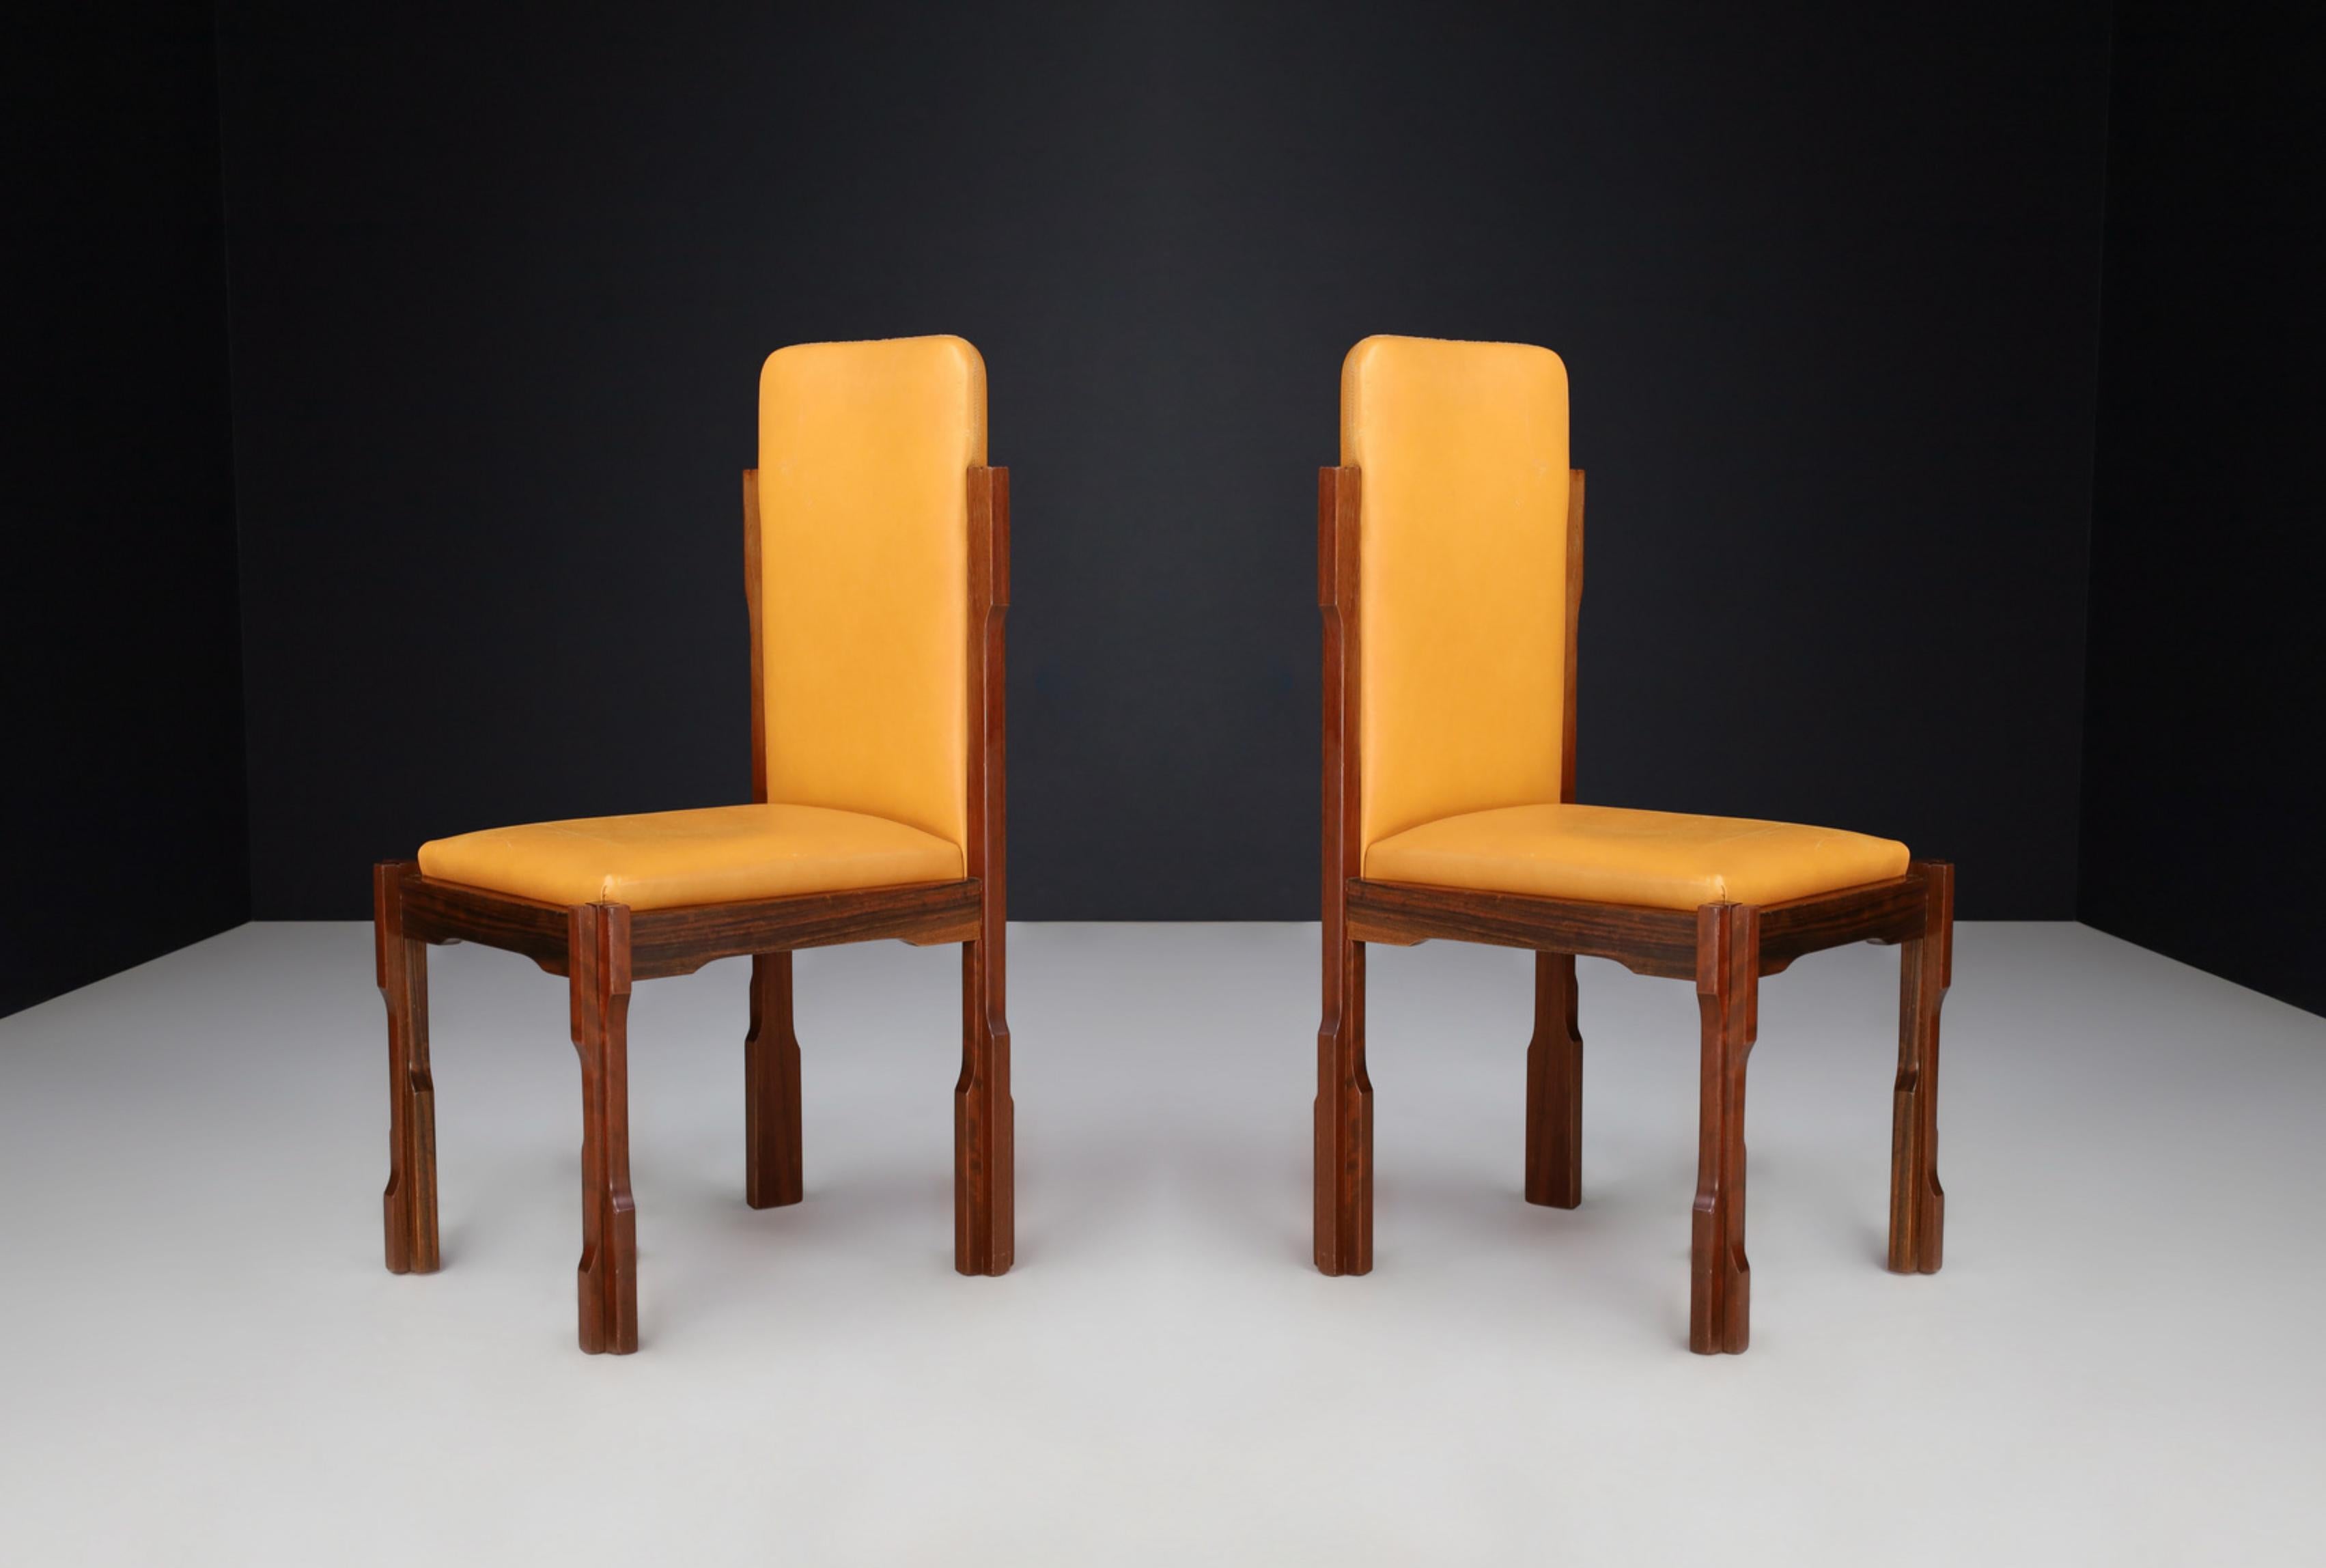 Brutalist Luciano Frigerio Walnut and Leather Desk Chairs, Italy 1970s  For Sale